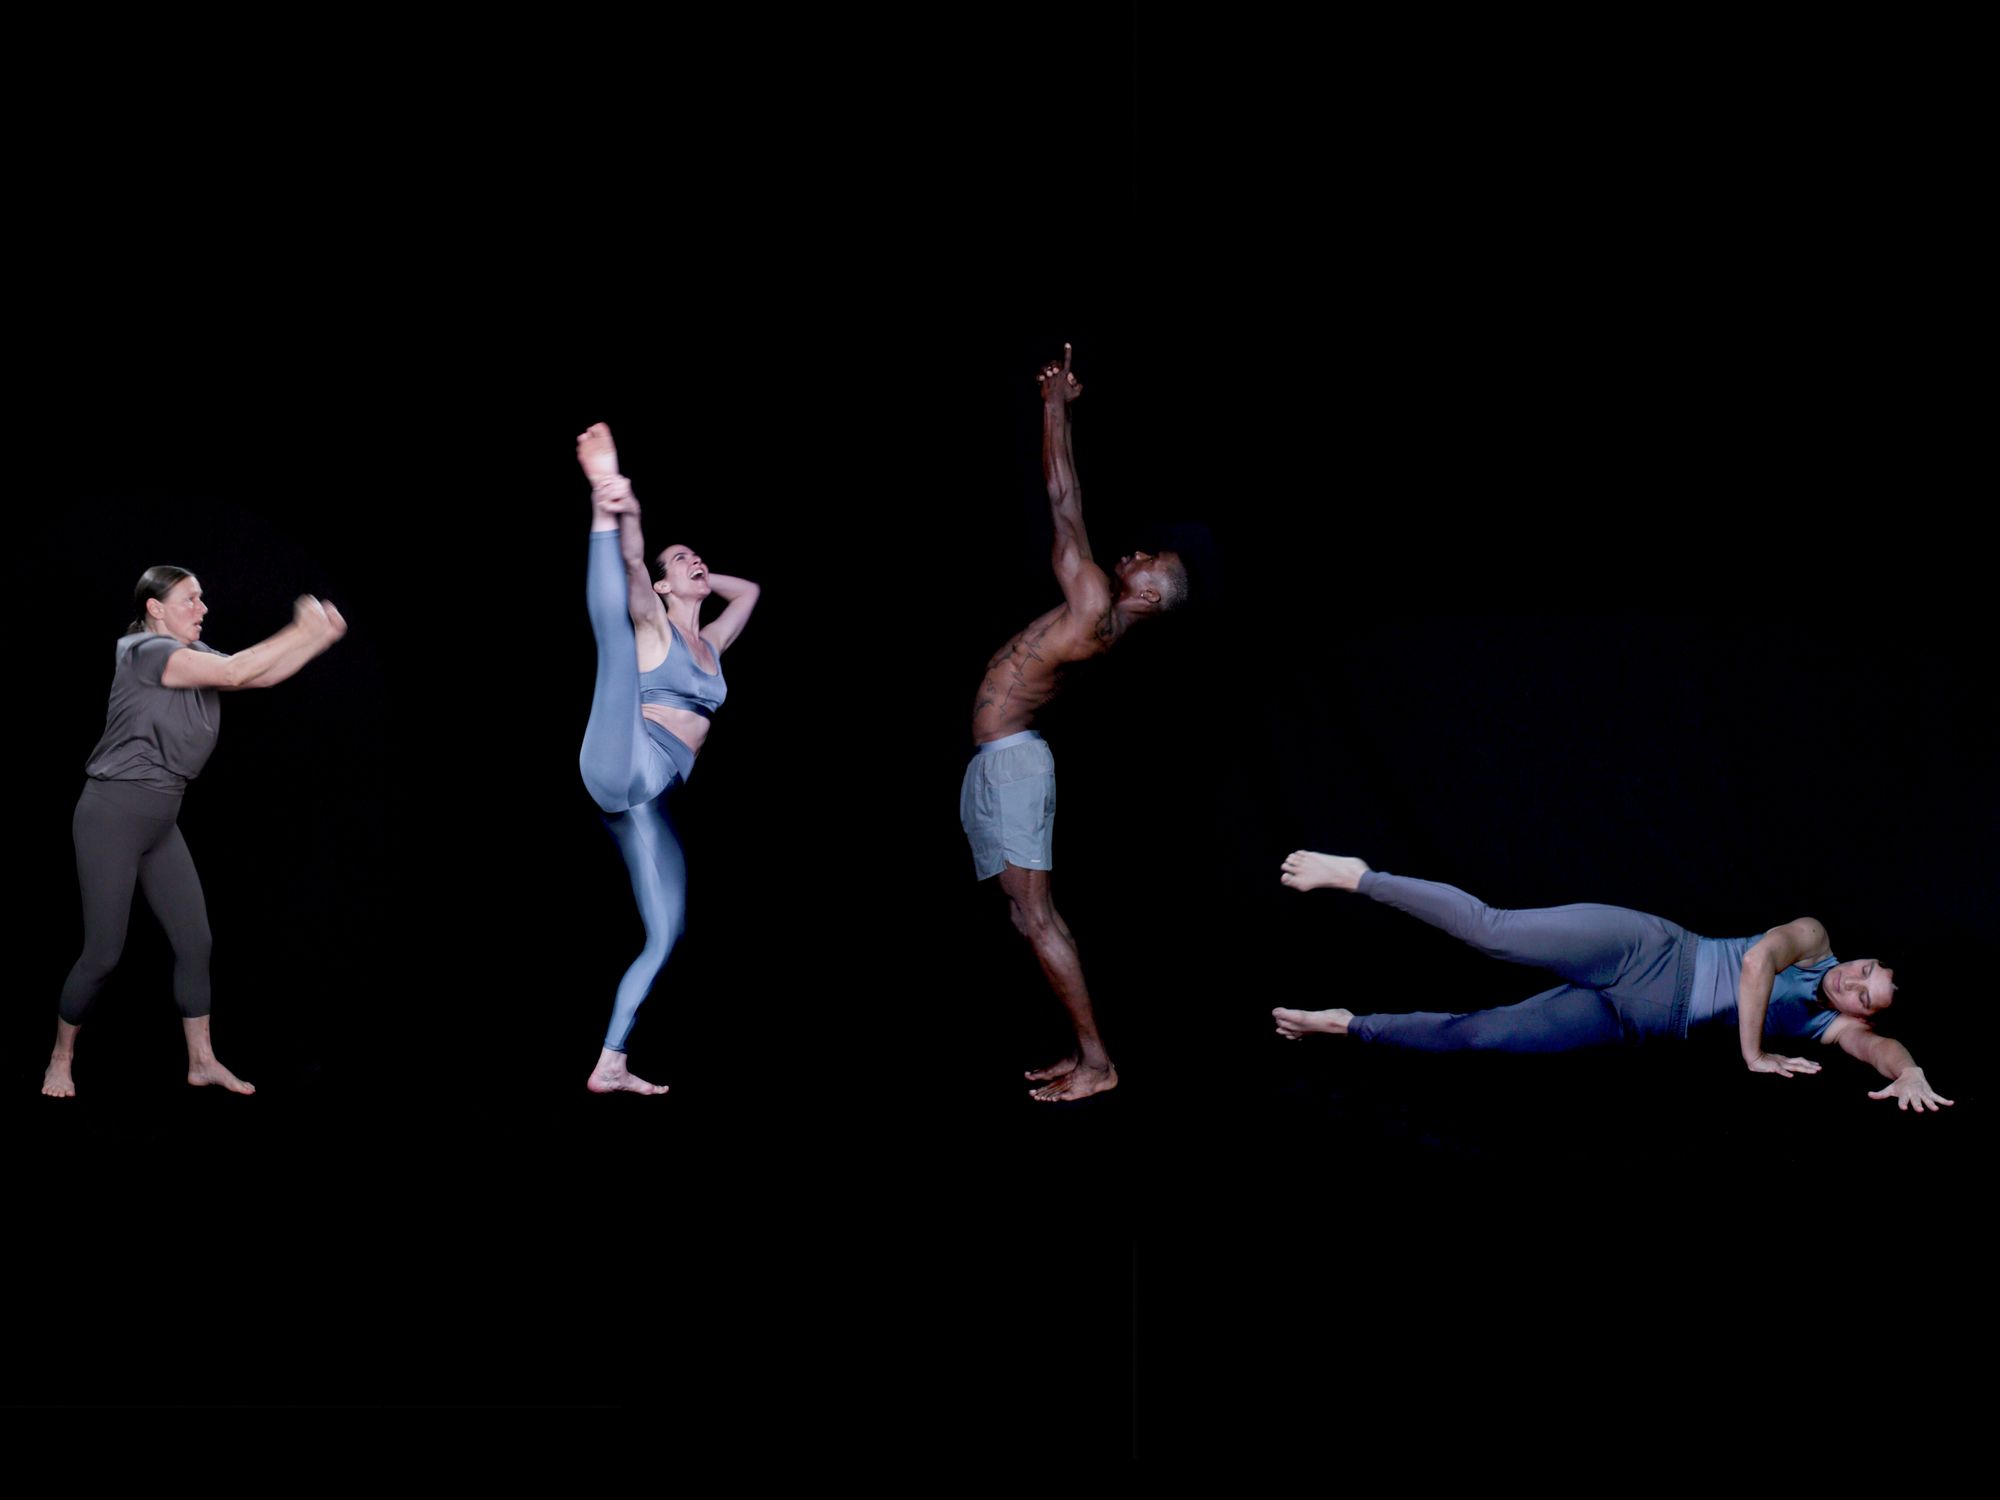 Dancers in different positions on a black background